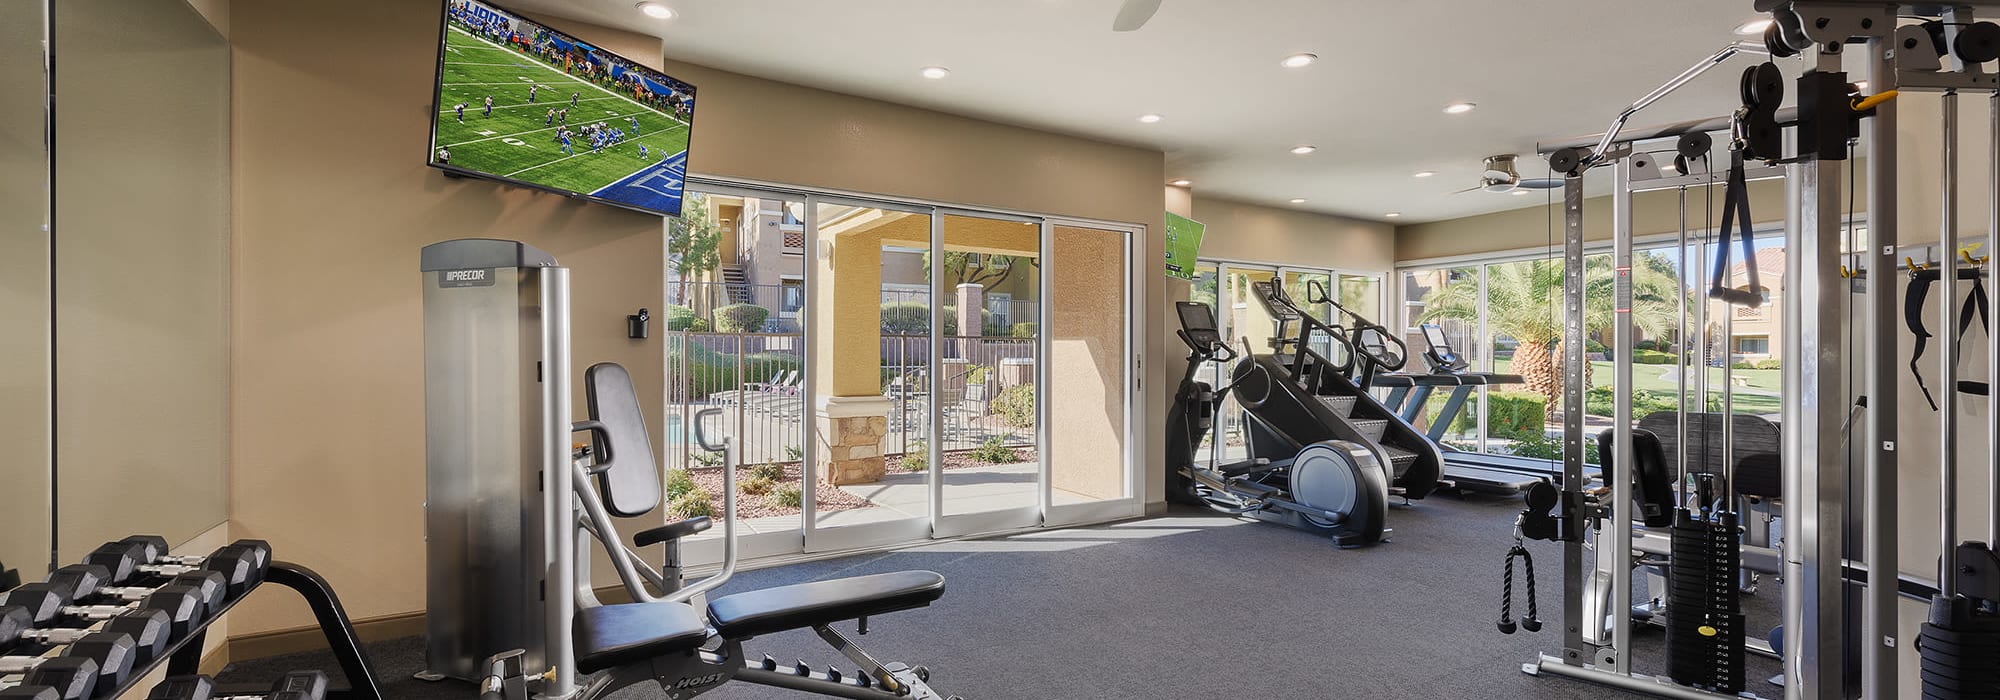 Fitness center at Shadow Hills at Lone Mountain in Las Vegas, Nevada